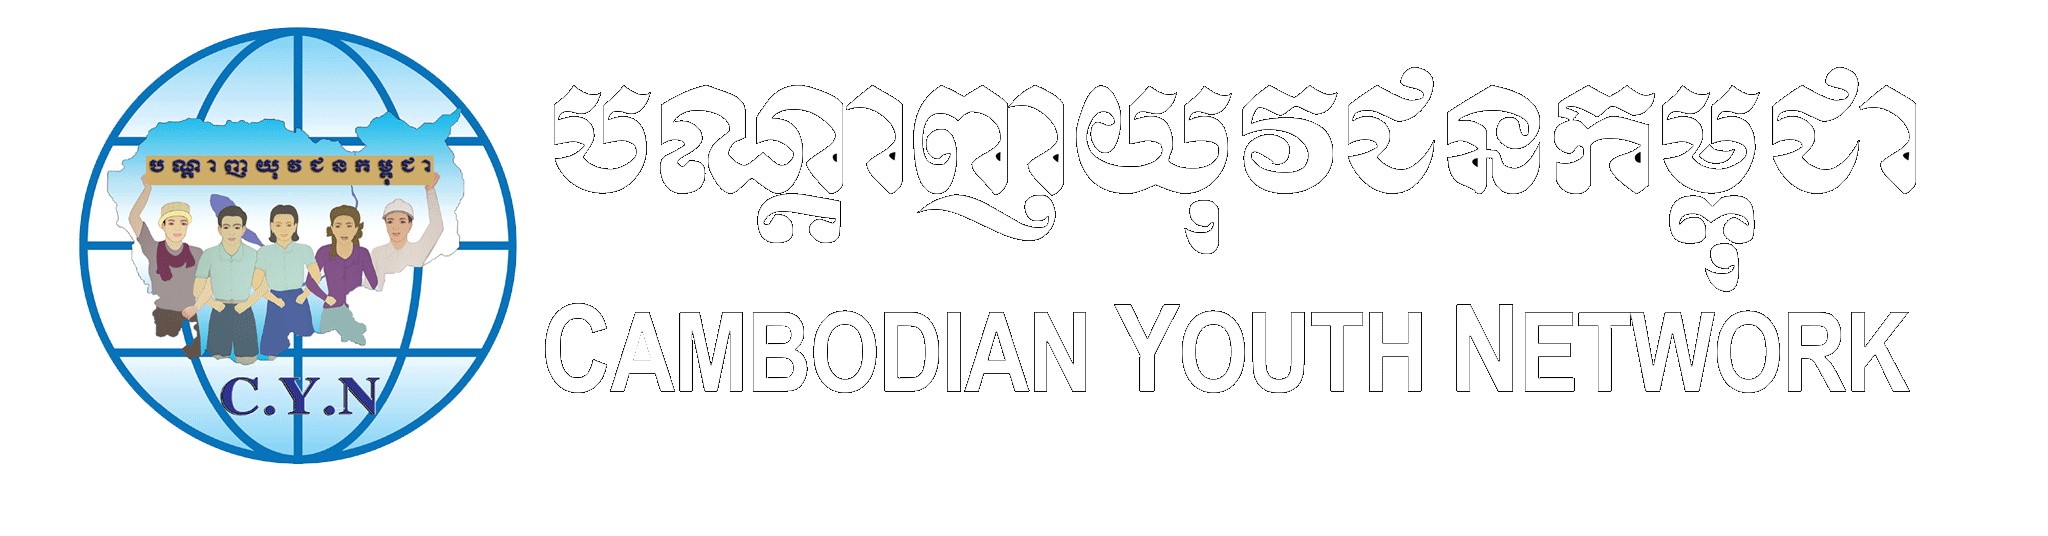 Cambodian Youth Network